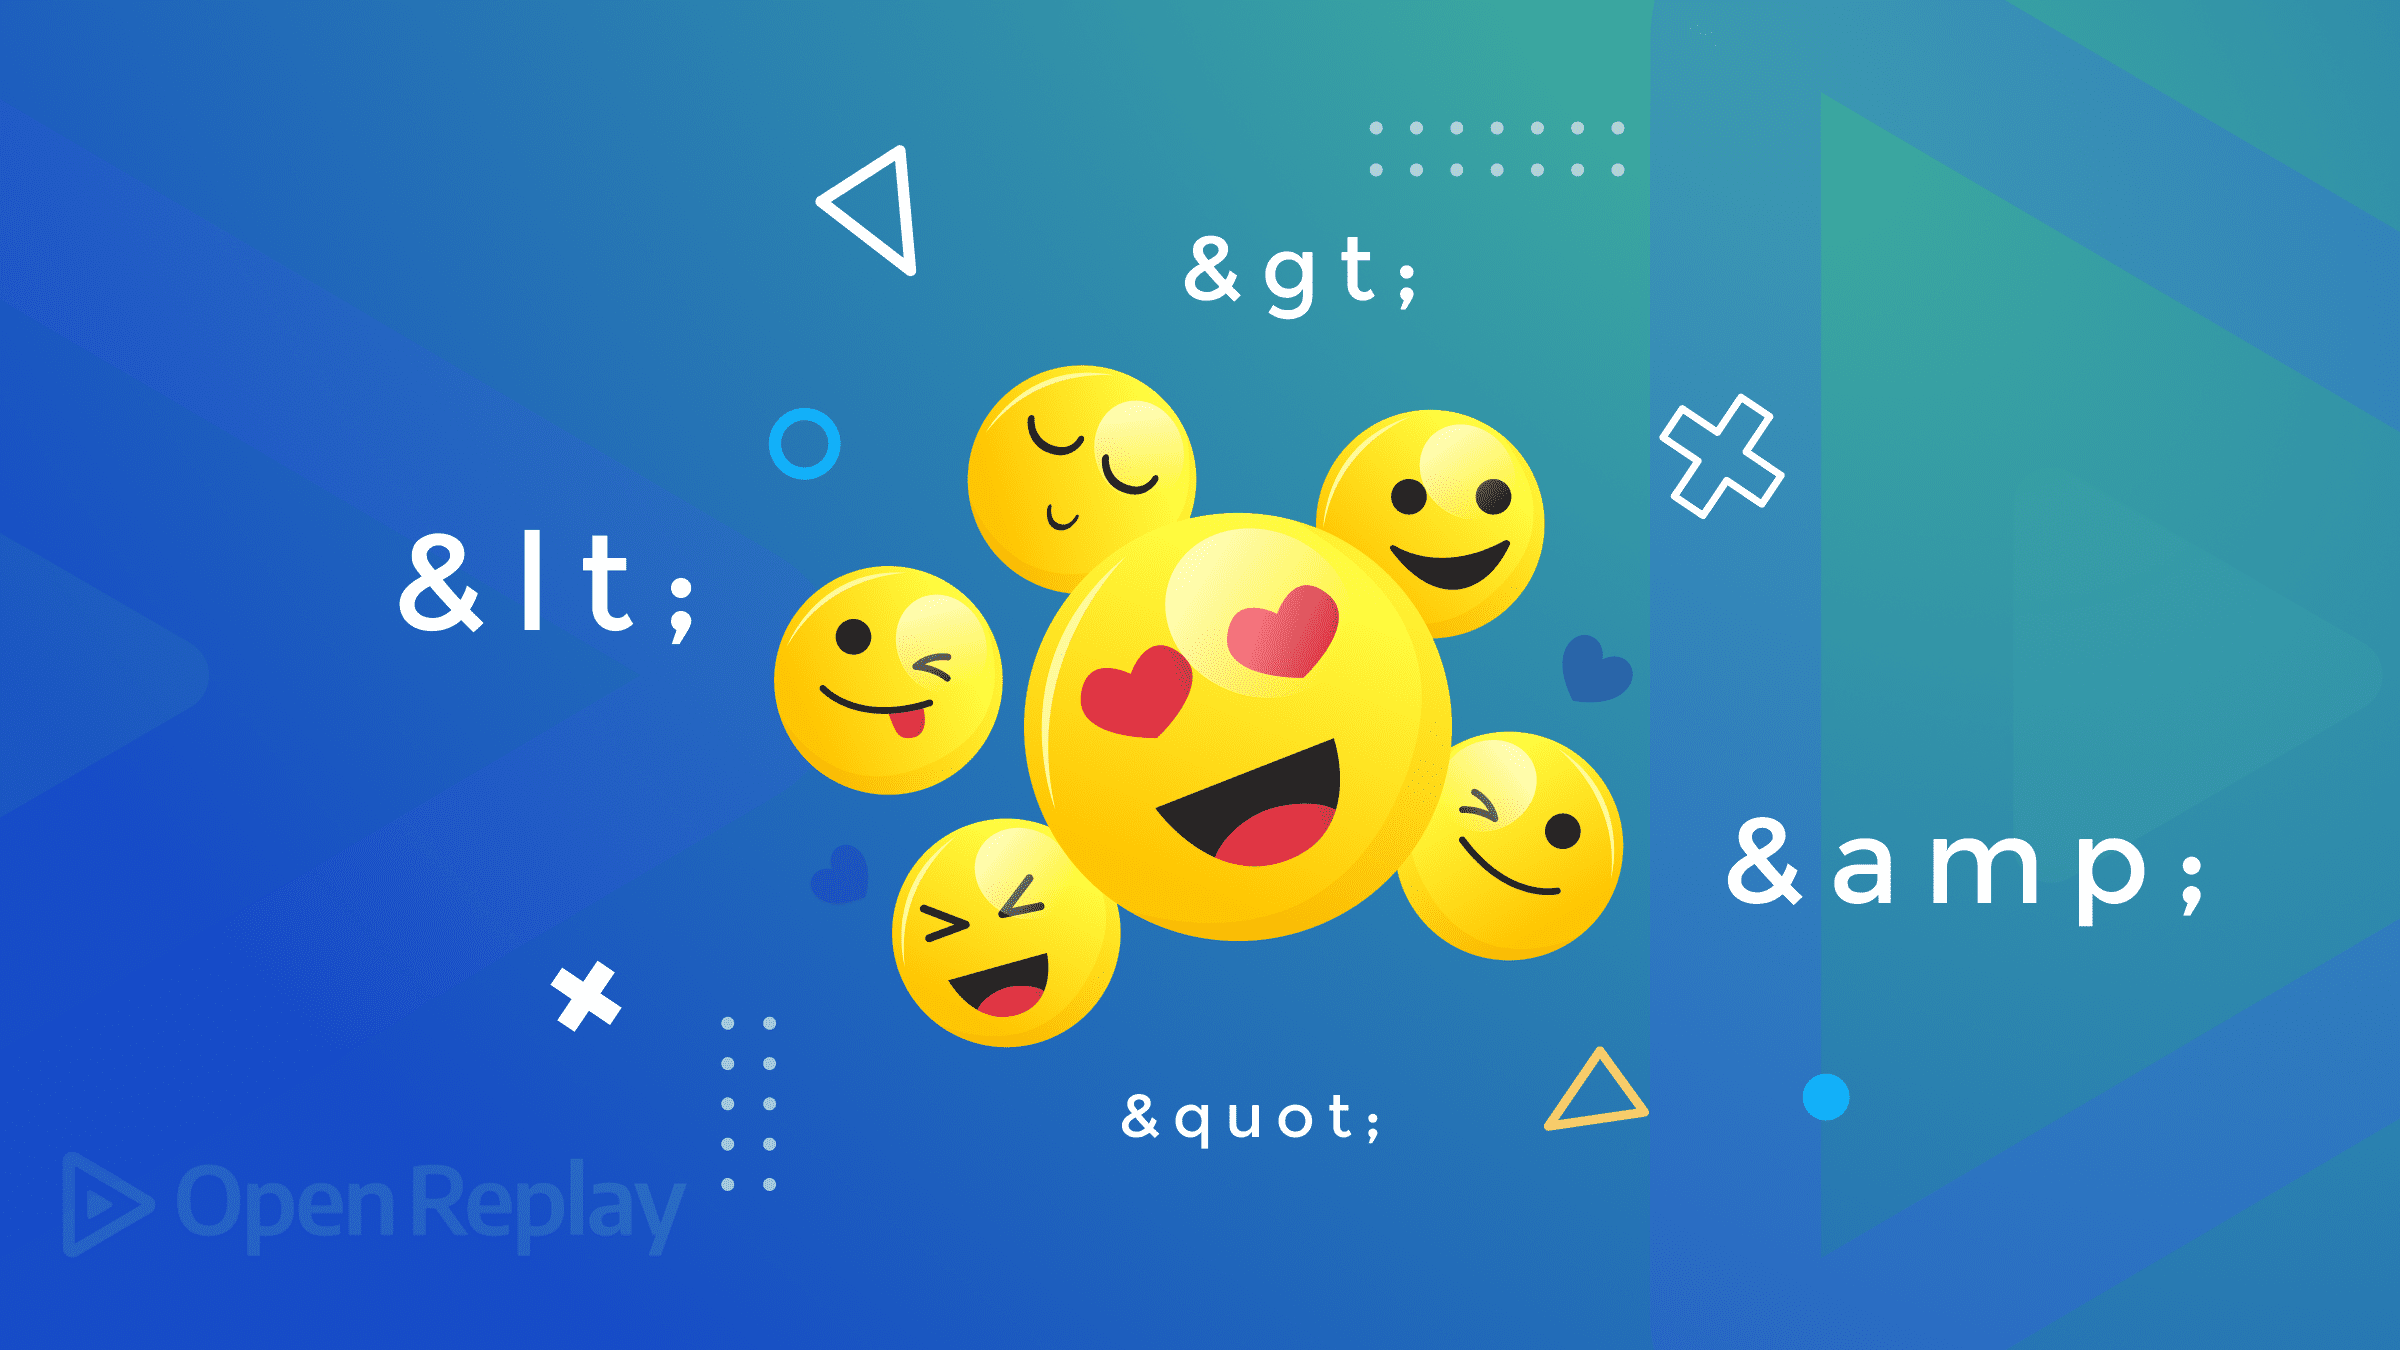 HTML Entities, Diacritical Marks, and Emojis